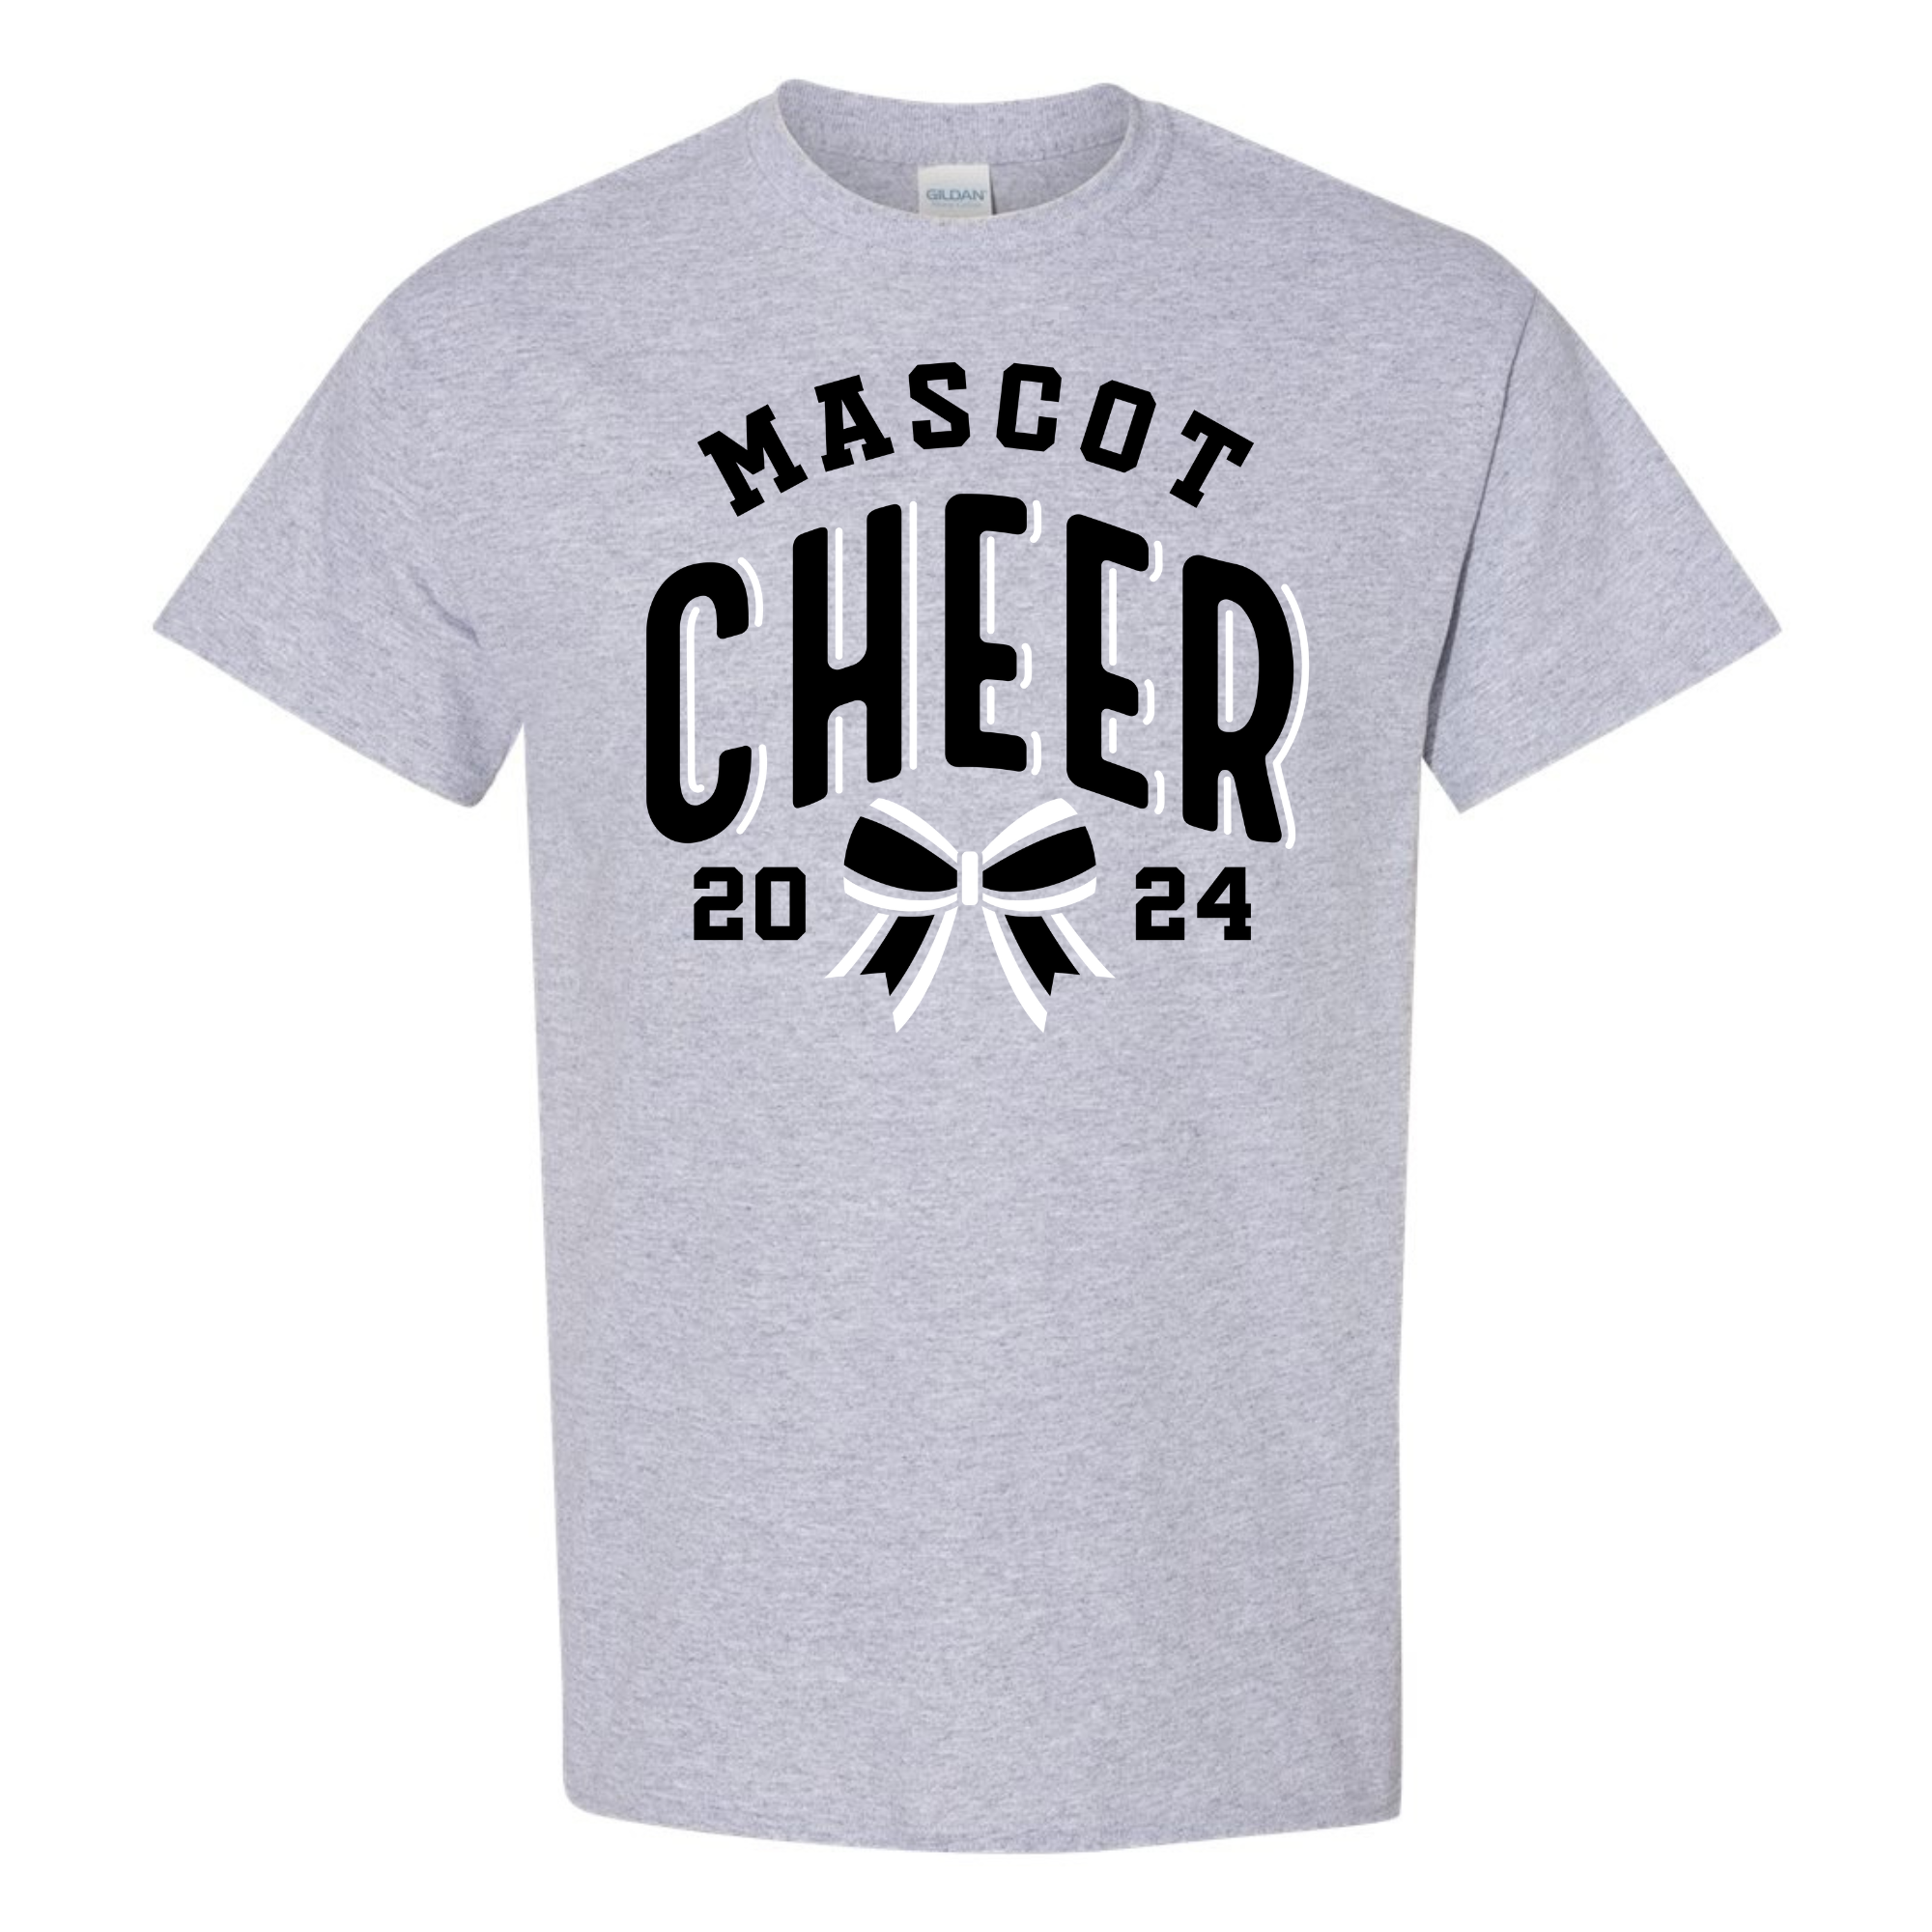 Wildcat Cheer with bow tee- 5000